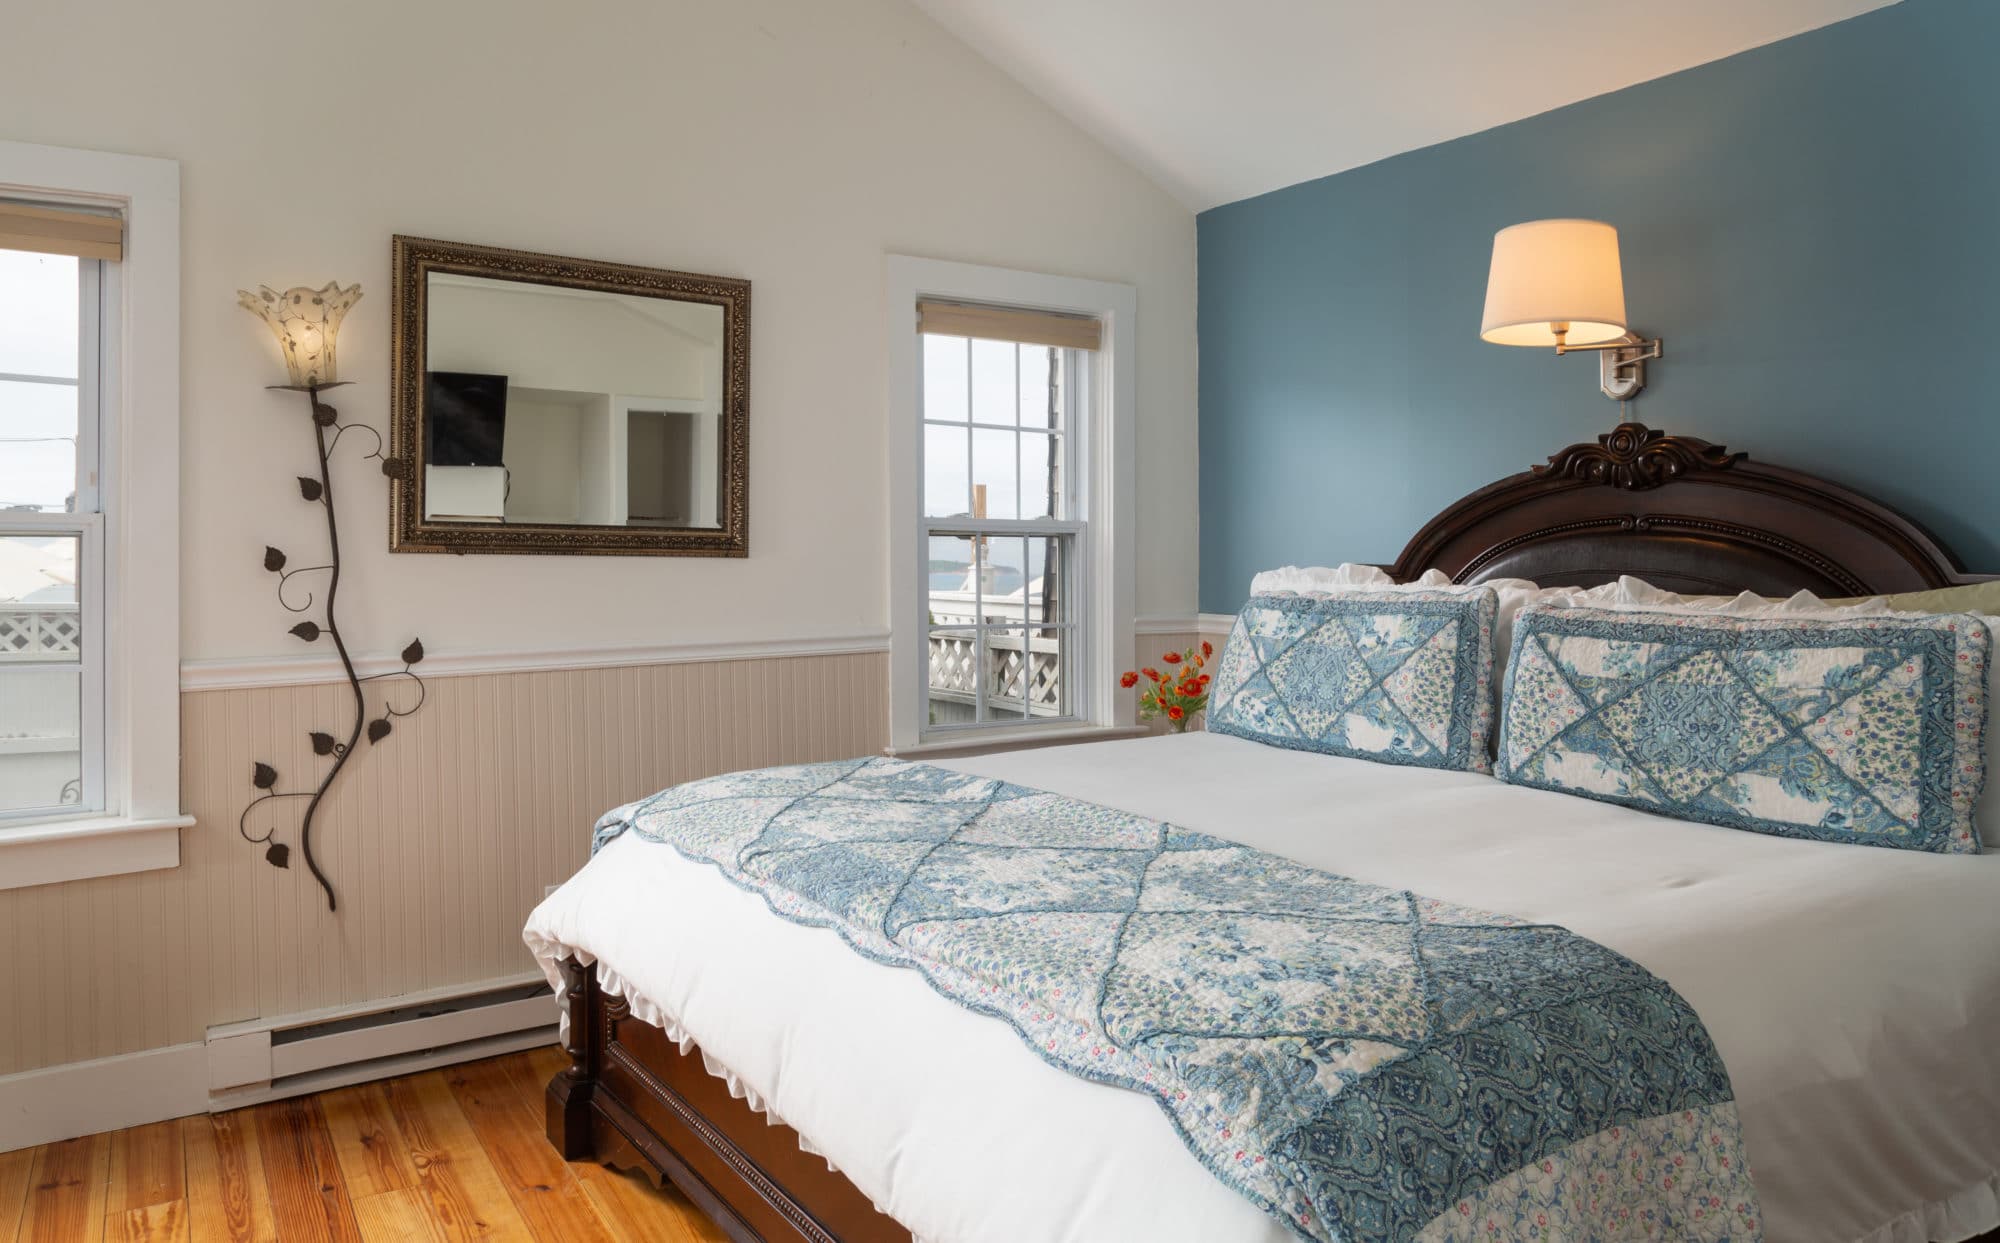 A guest room at the Blue Dory Inn - a top-rated Block Island Bed and Breakfast